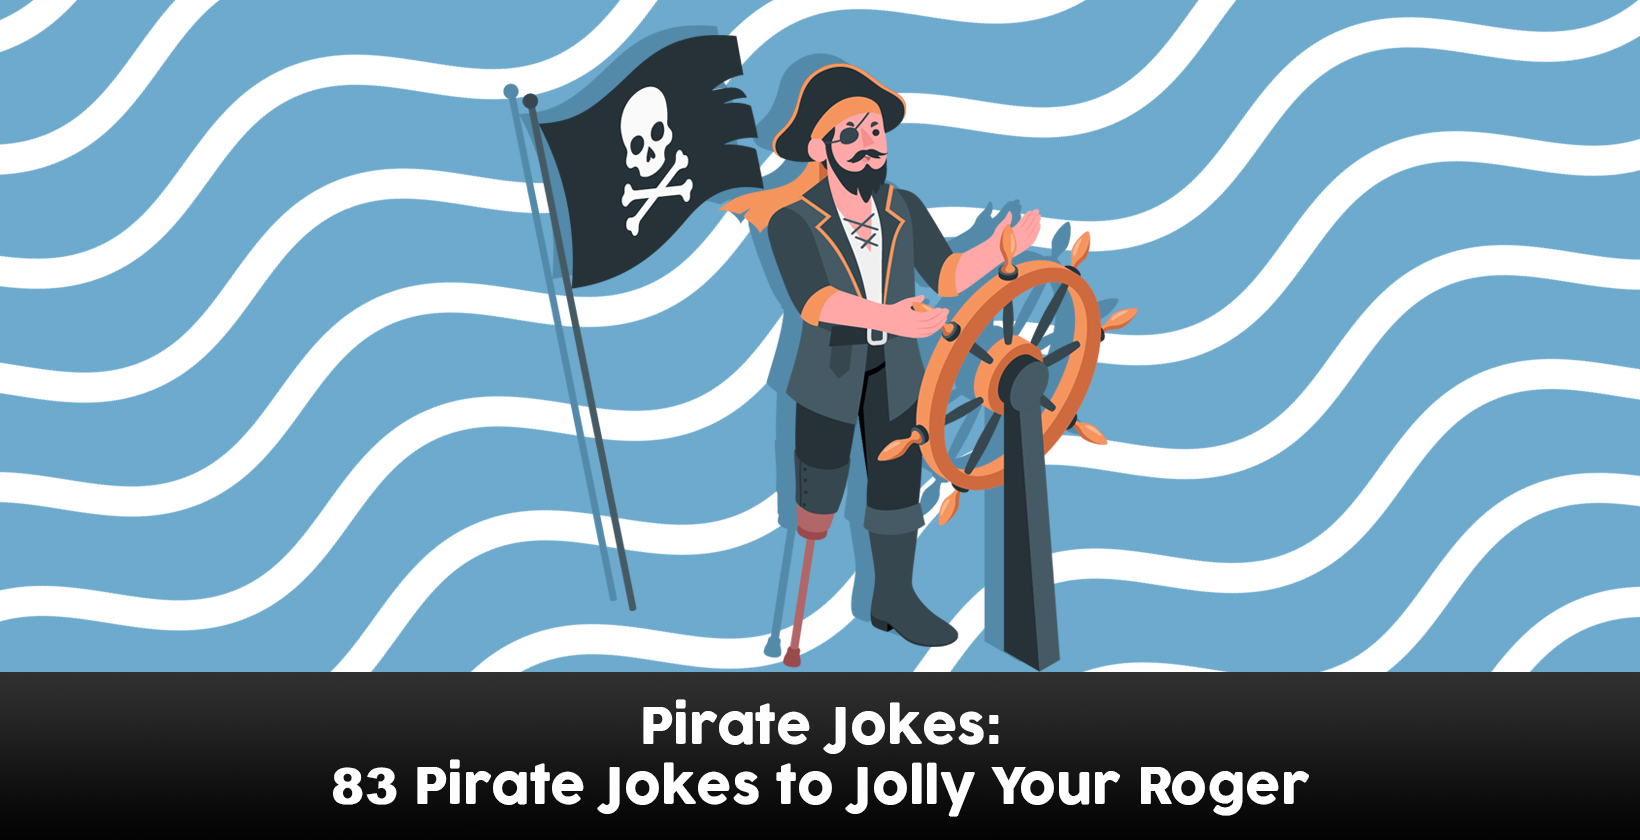 Pirate Jokes: 83 Pirate Jokes to Jolly Your Roger